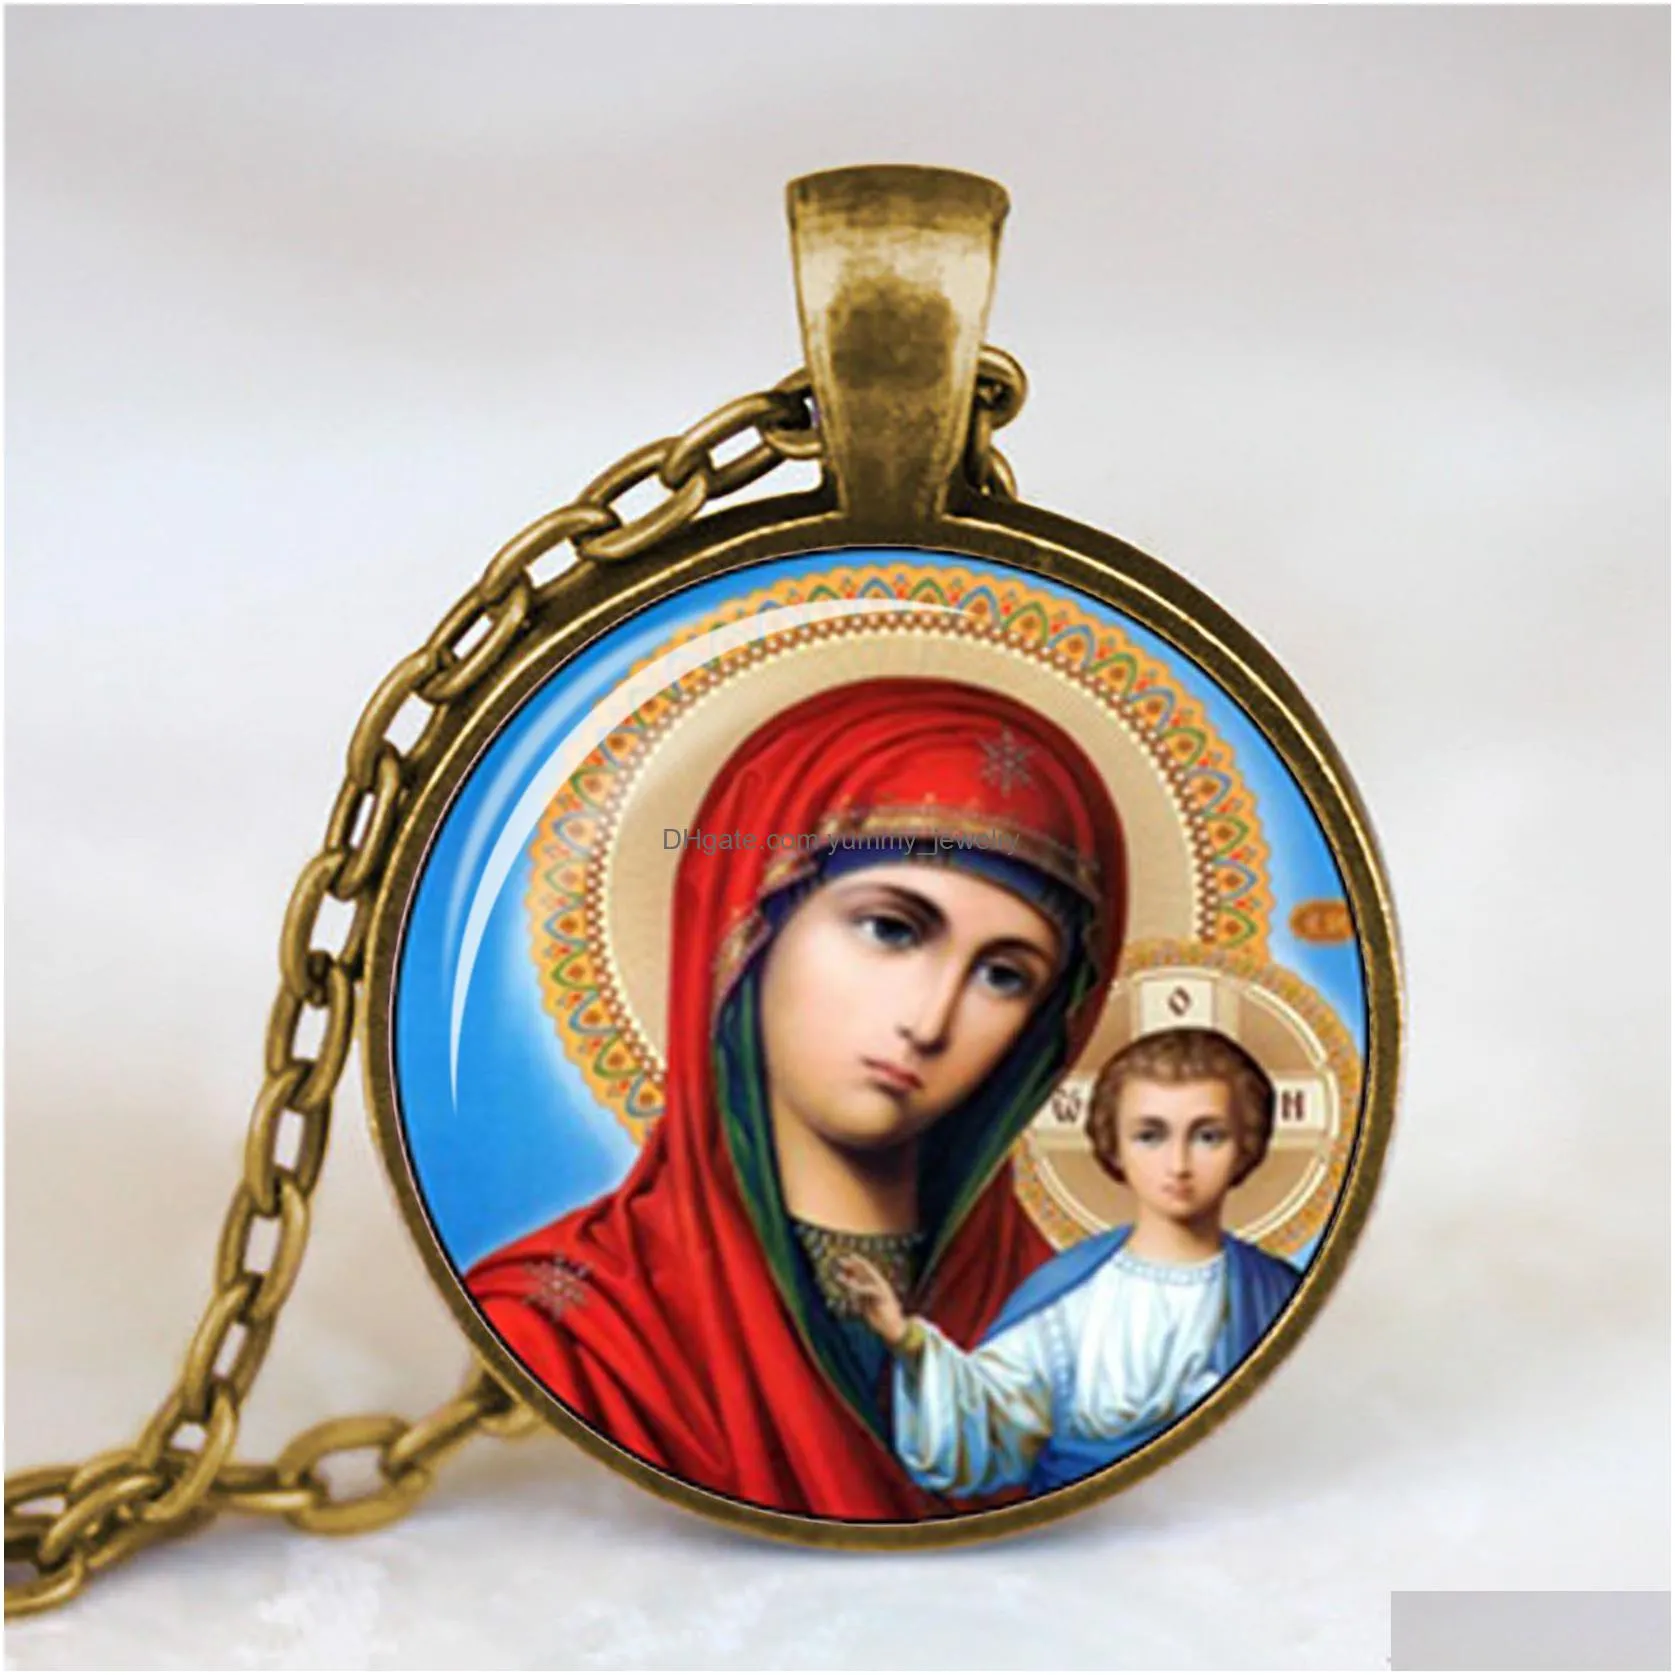 blessed virgin mary mother of baby necklace jesus christ christian pendant catholic religious glass jewelry gift for men women